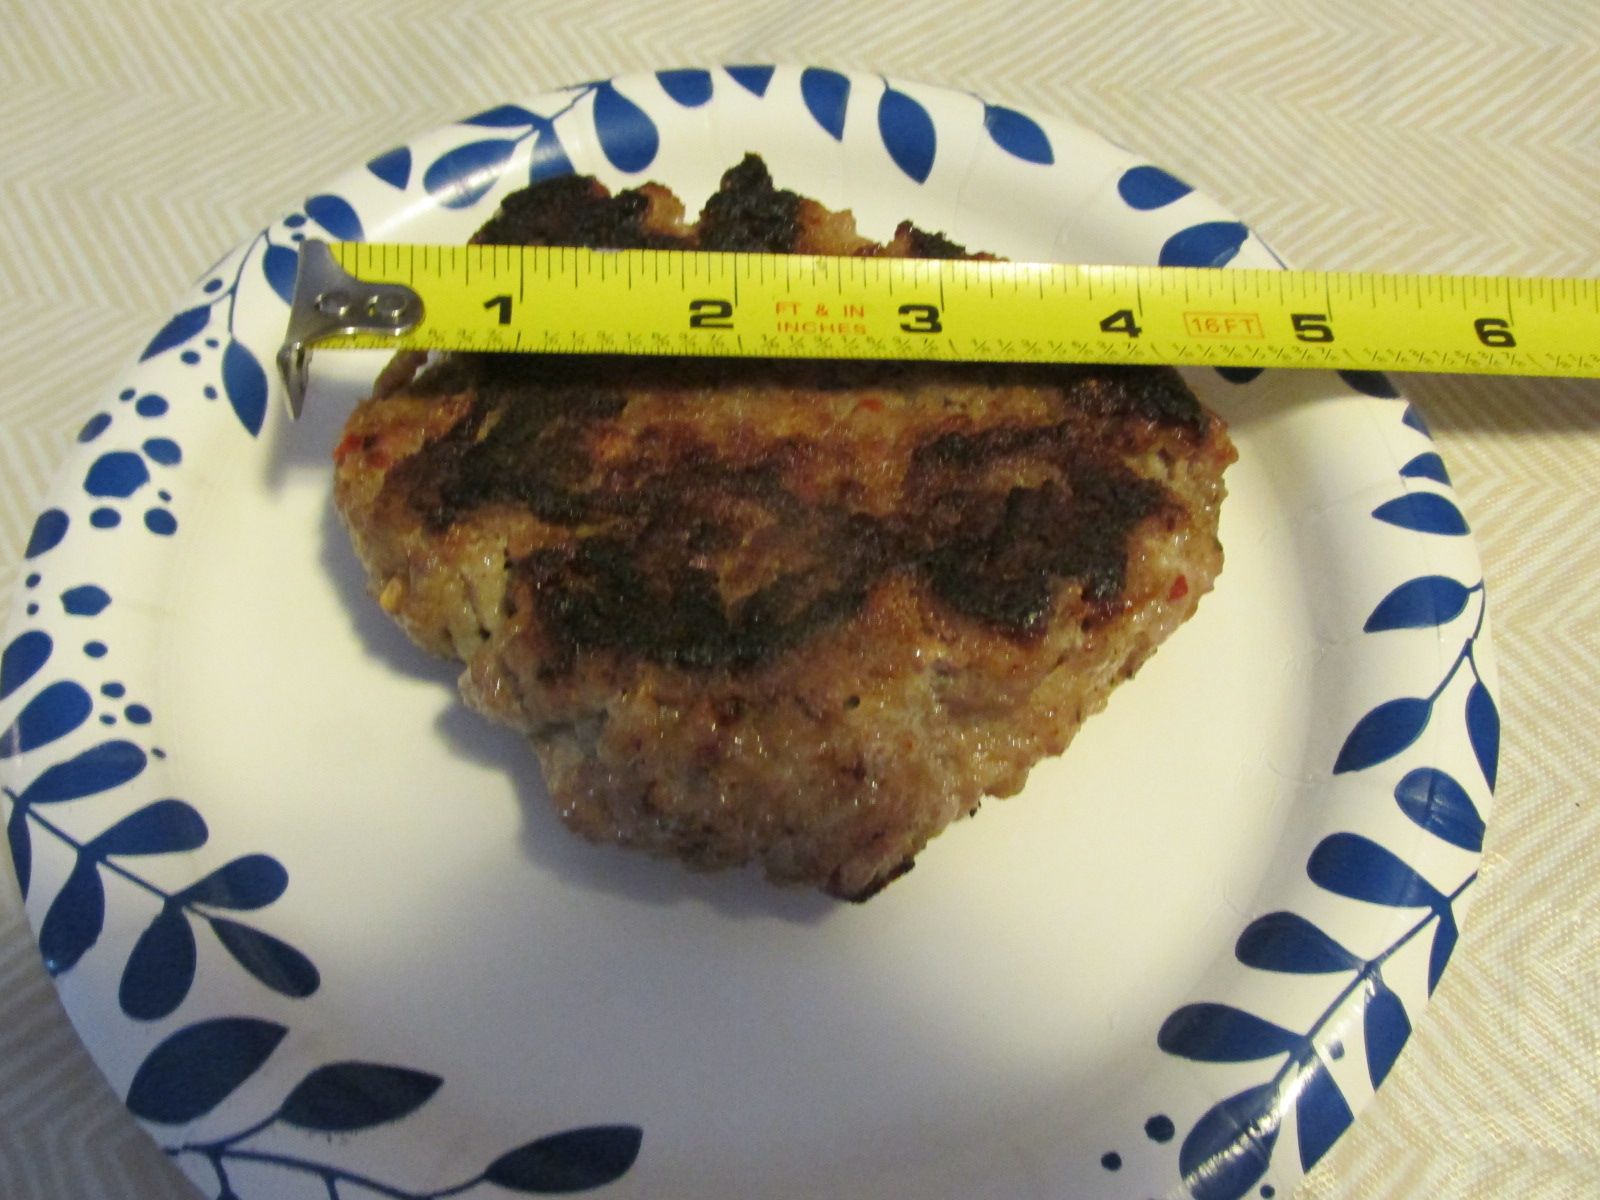 240221 003 cooked sausage pattty 001.jpg